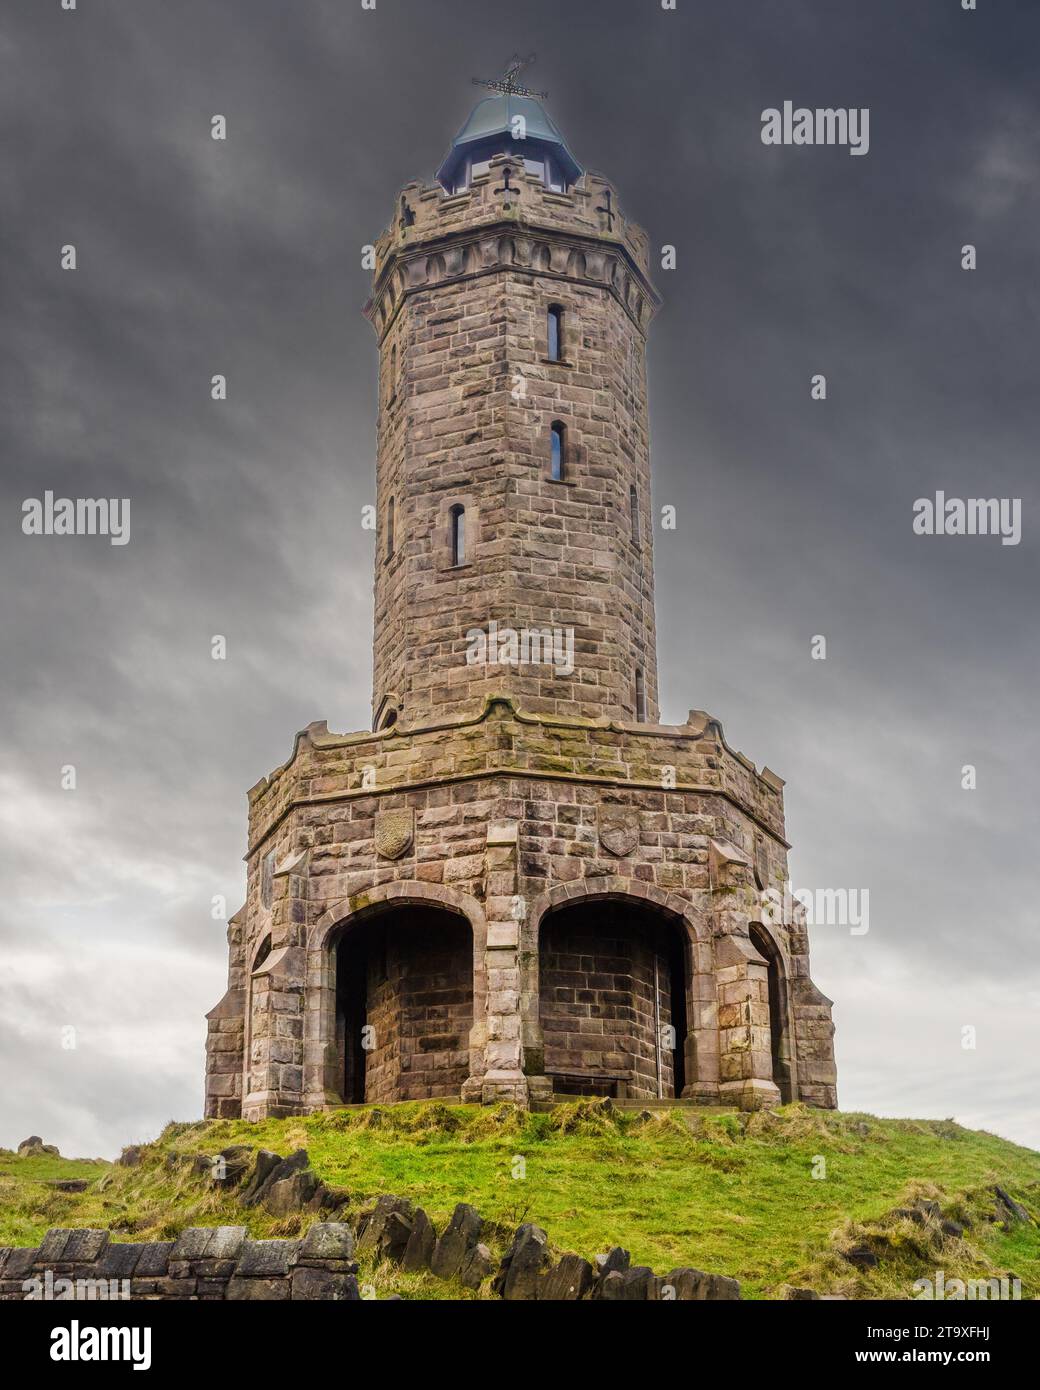 21.11.23 Darwen, Lancashire, UK. The octagonal Jubilee Tower (officially called Darwen Tower) at grid reference SD678215 on Darwen Hill overlooking th Stock Photo